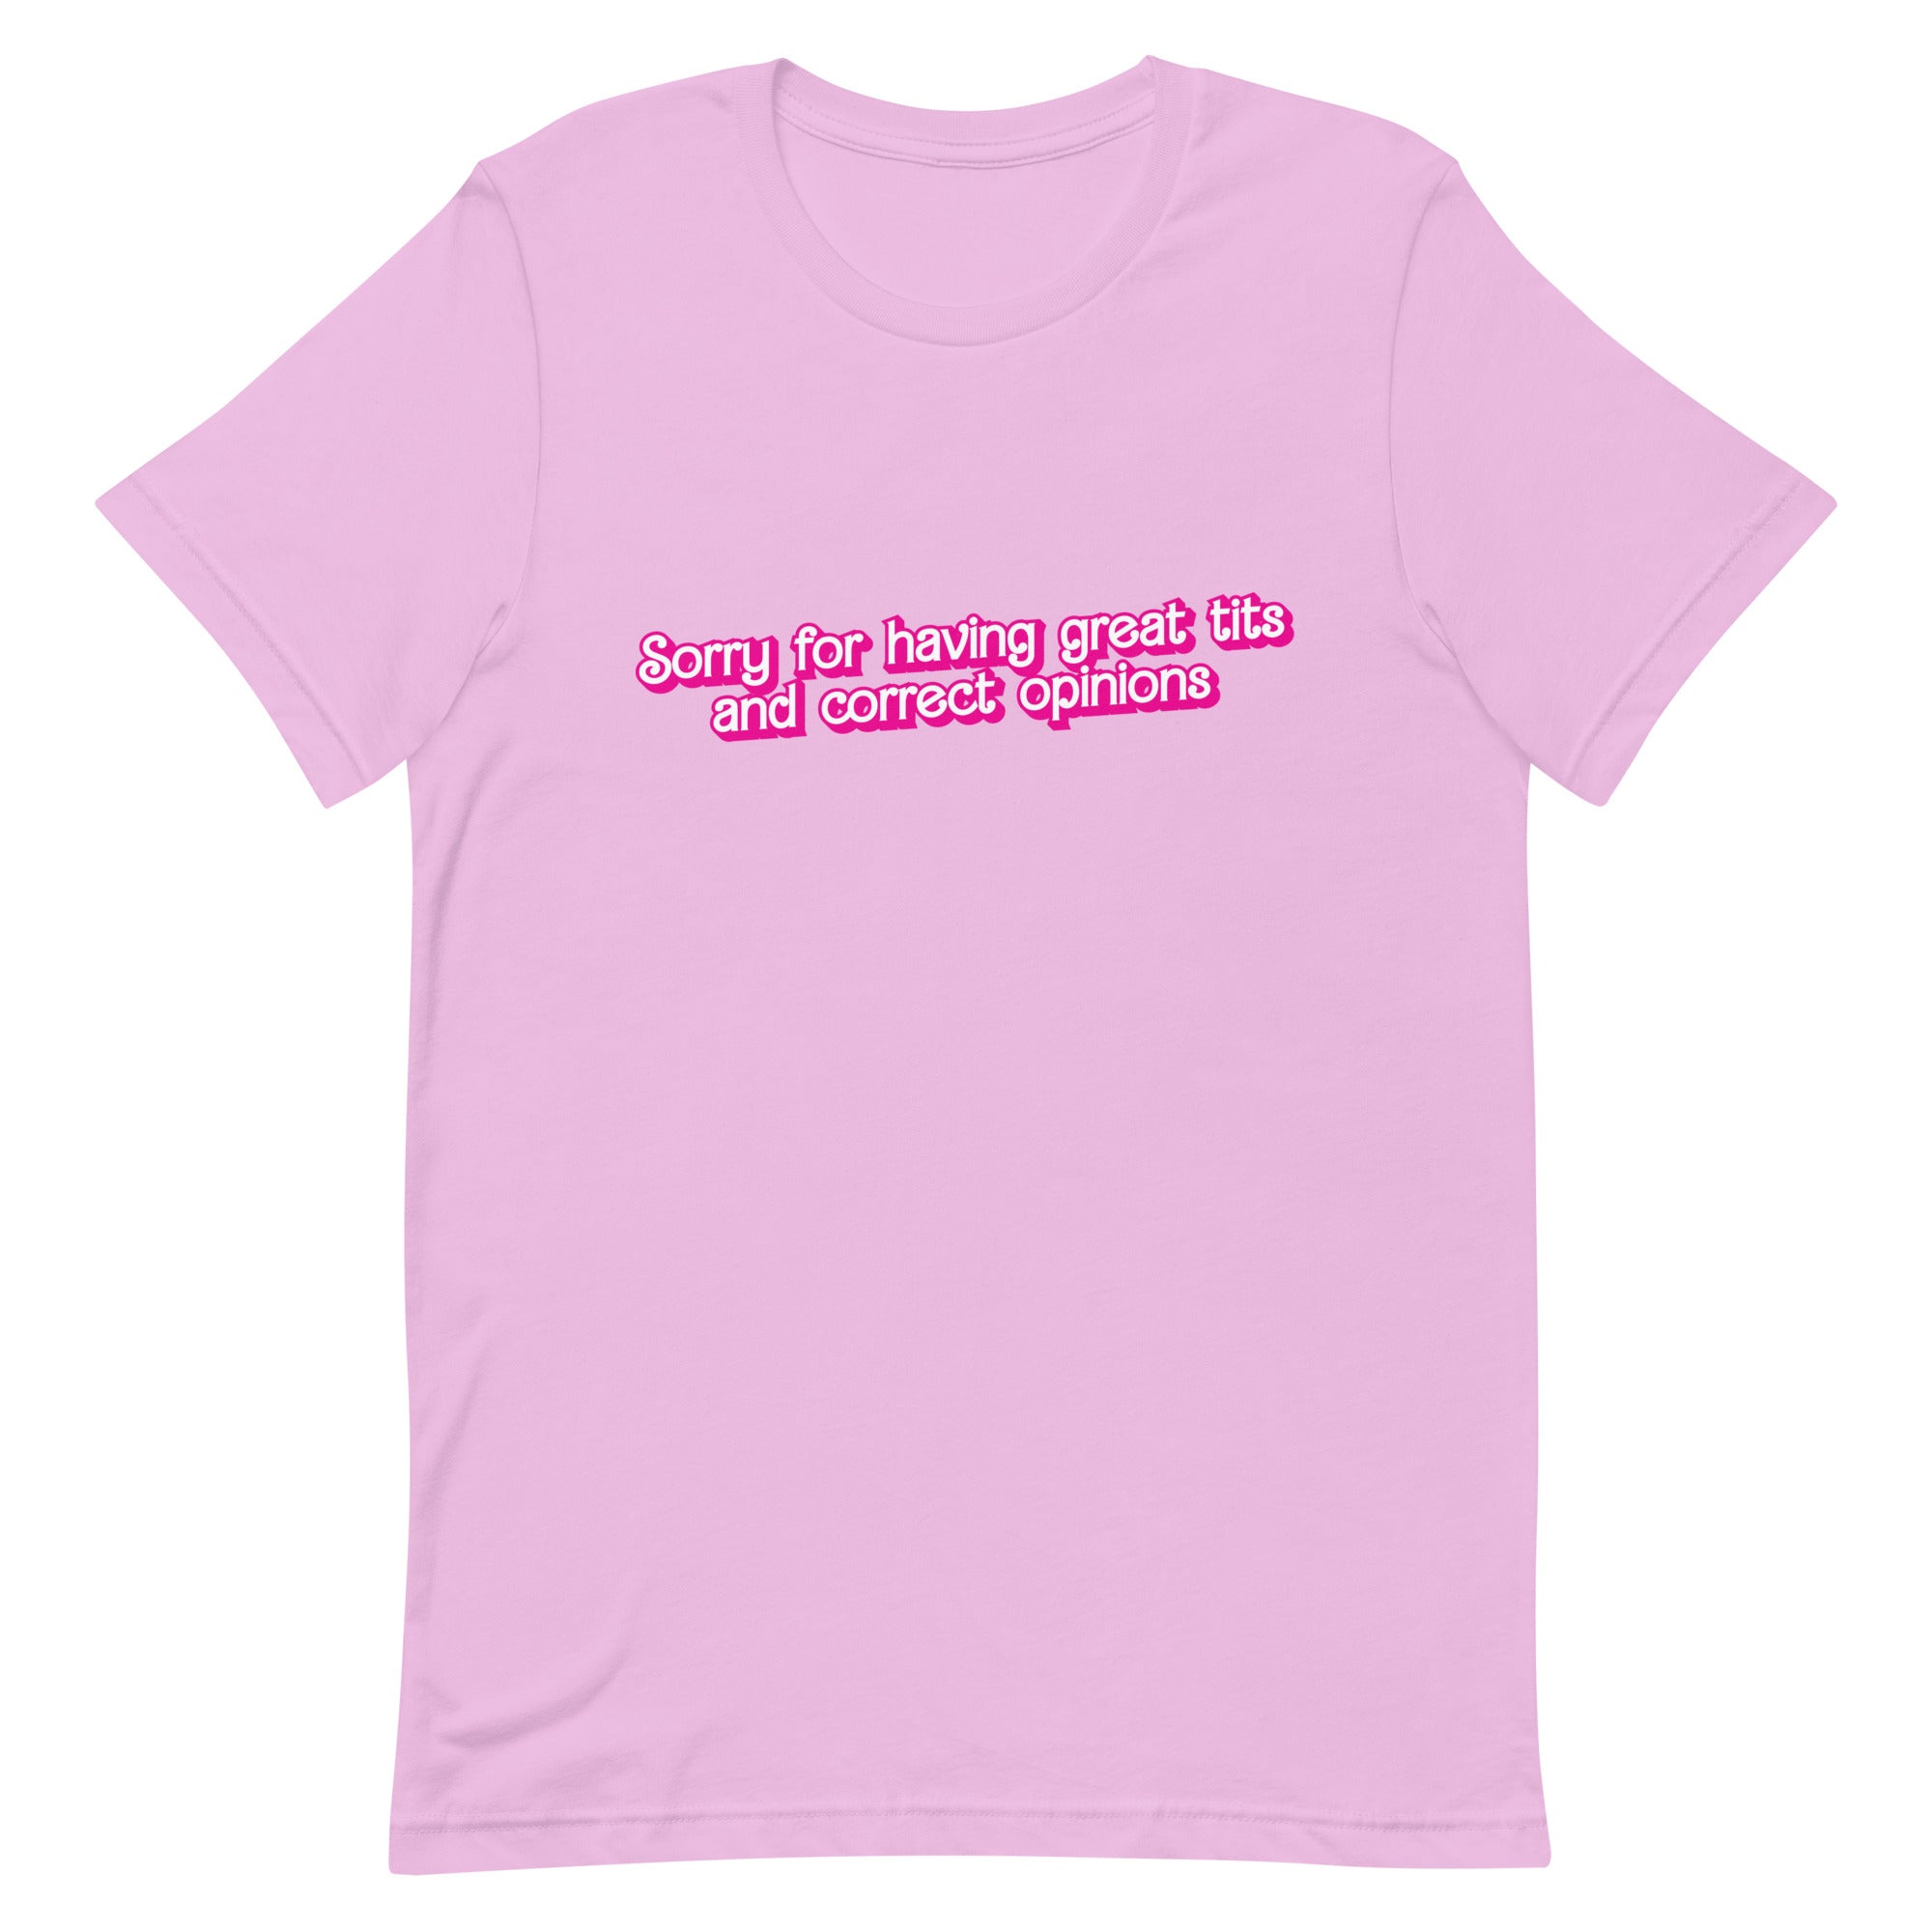 Sorry for Having Great Tits and Correct Opinions on Everything Baby Tee,  Funny Great Tits Crop Top Shirt 